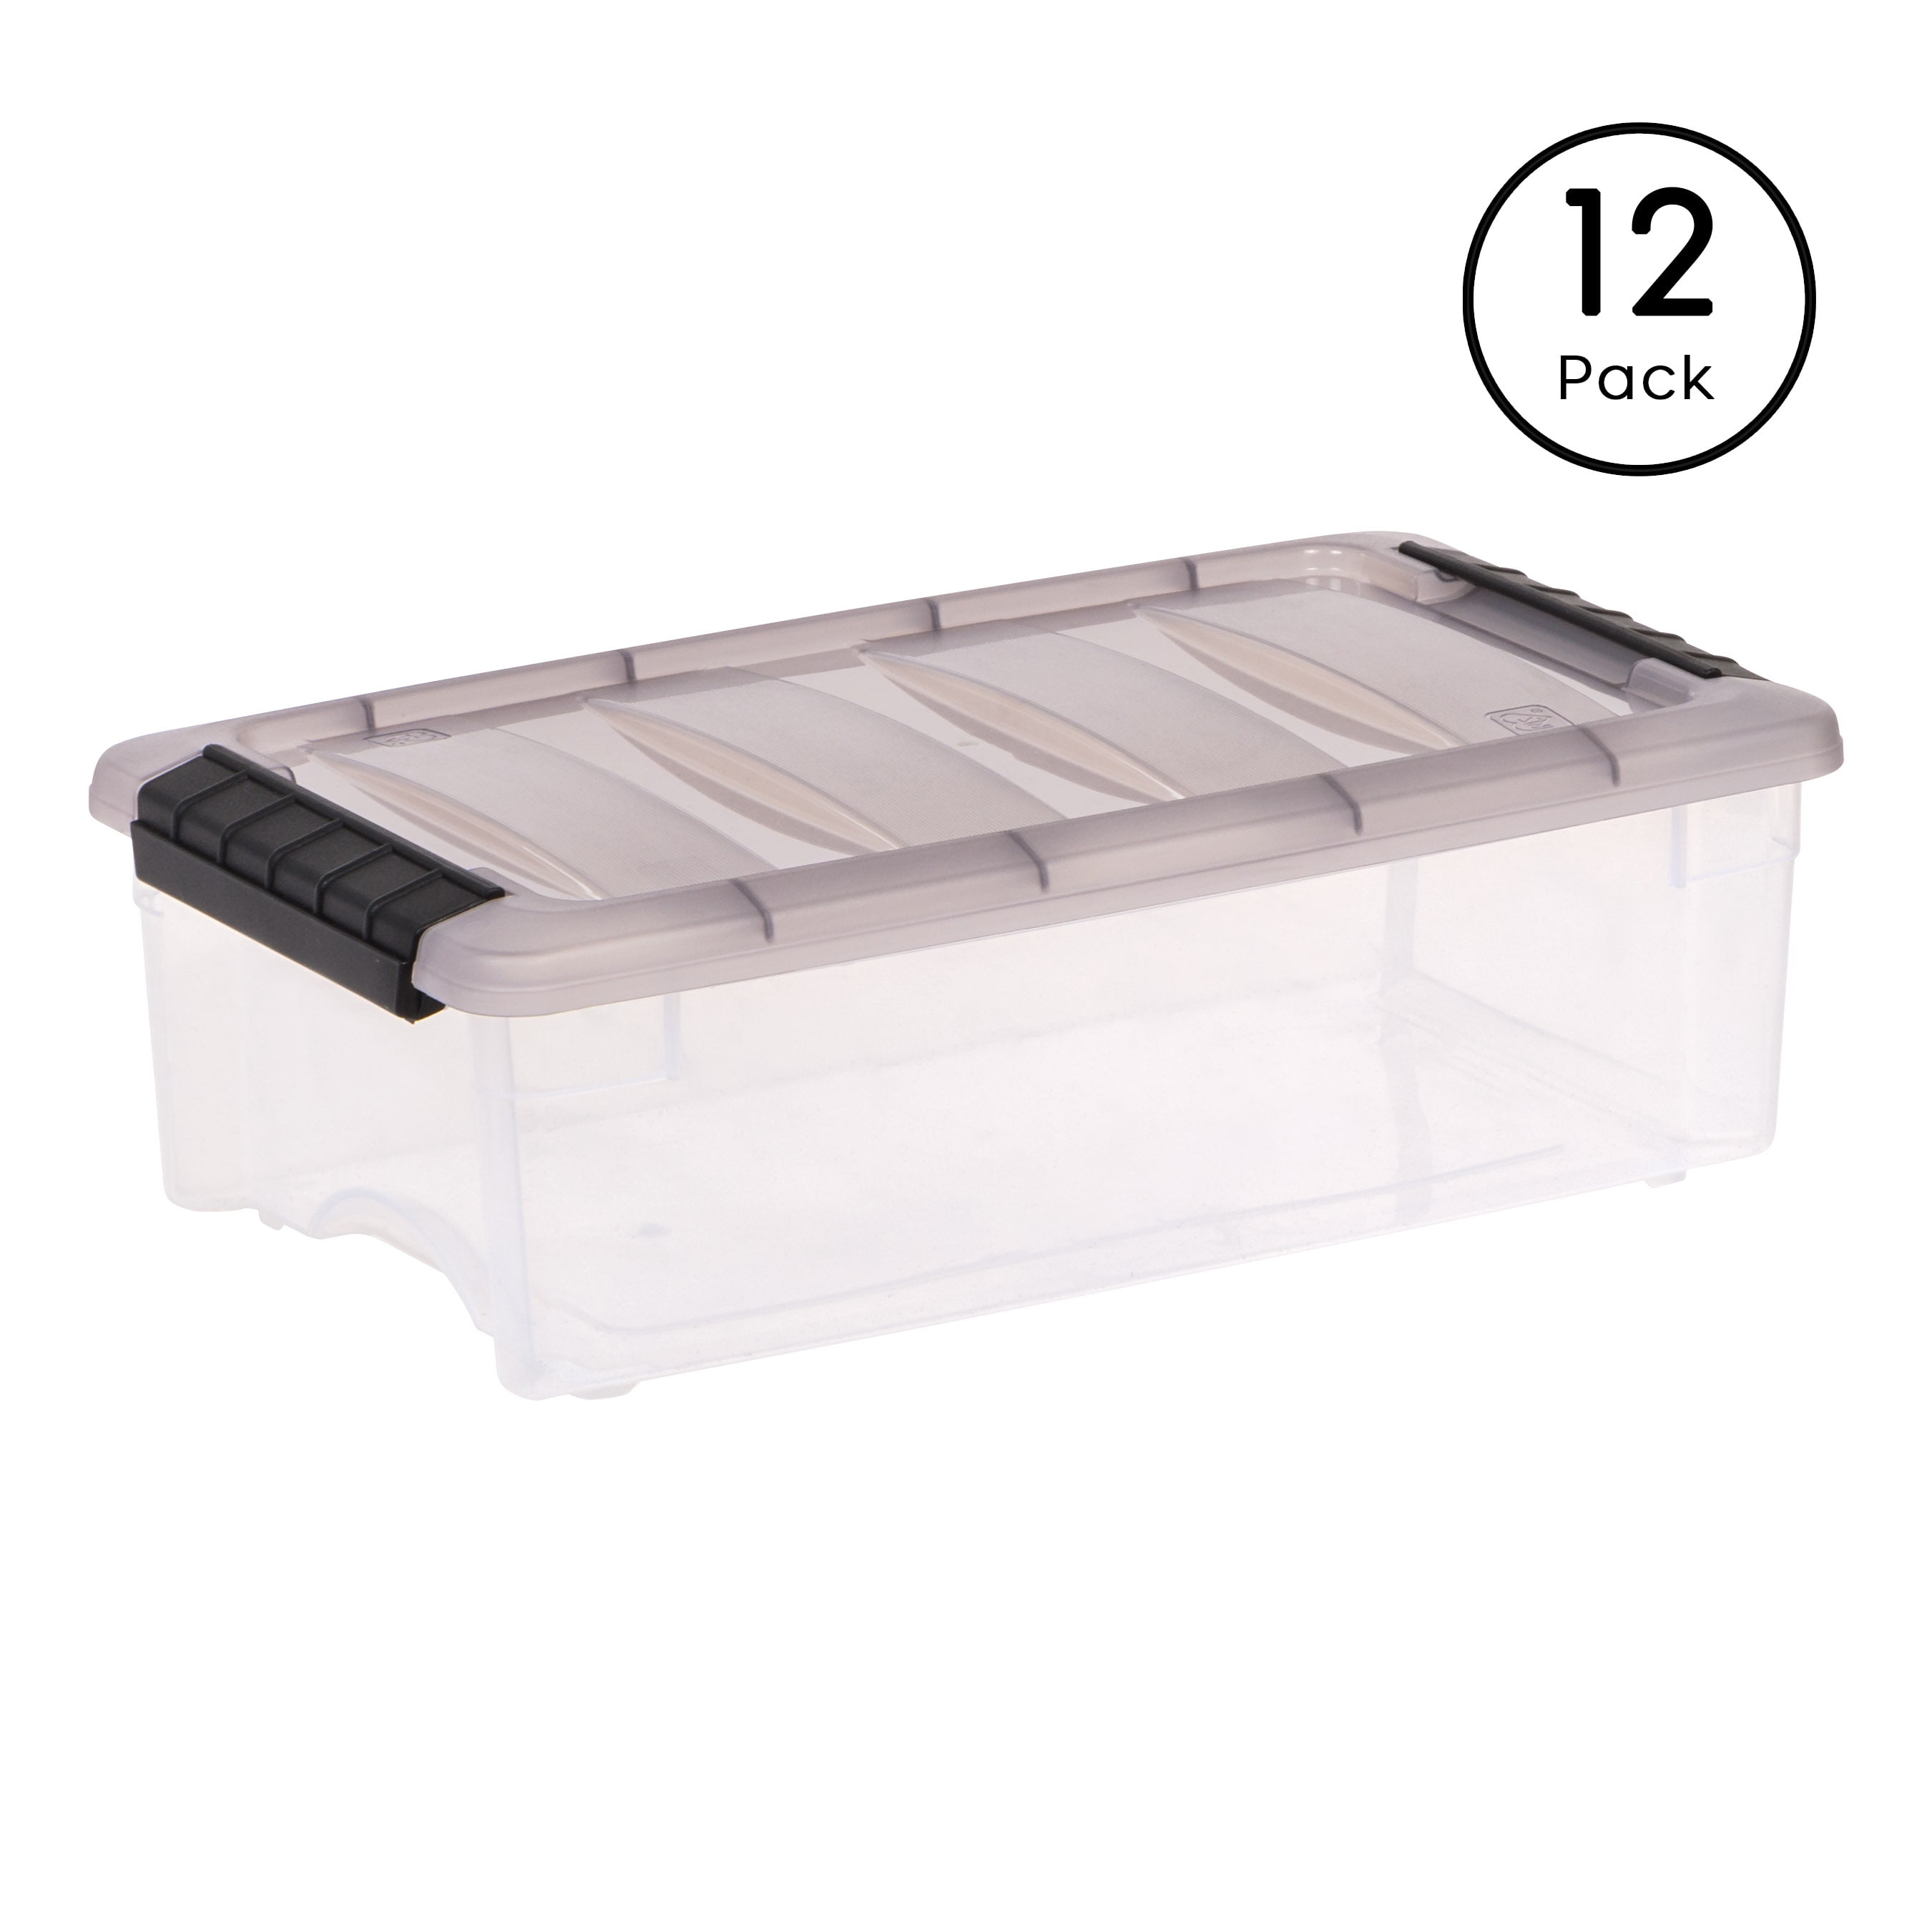 Strong Plastic Storage Boxes With Lids Stackable Underbed Home Office Toys File 